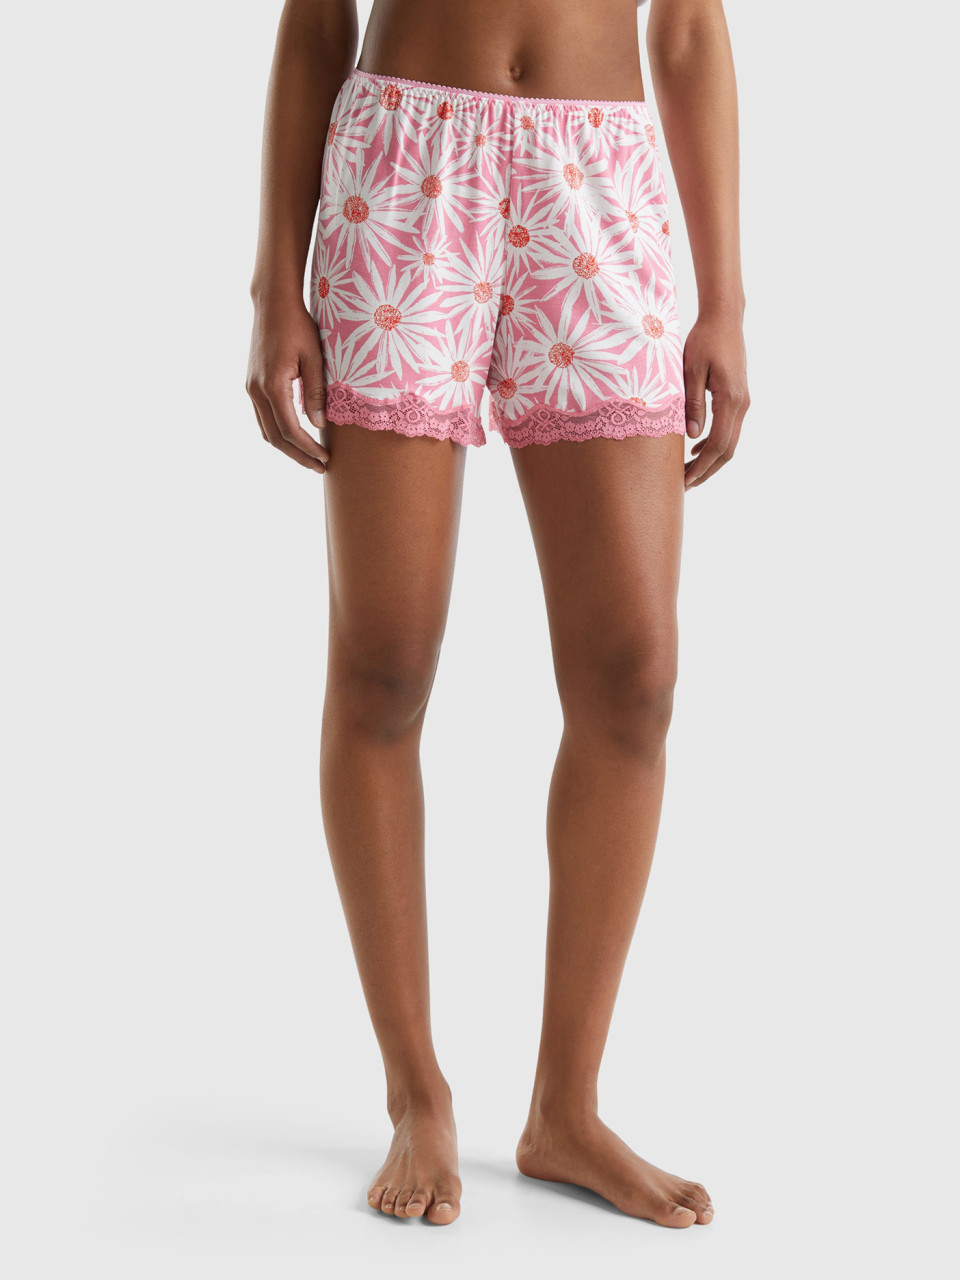 Benetton, Floral Shorts In Stretch Viscose, Pink, Women